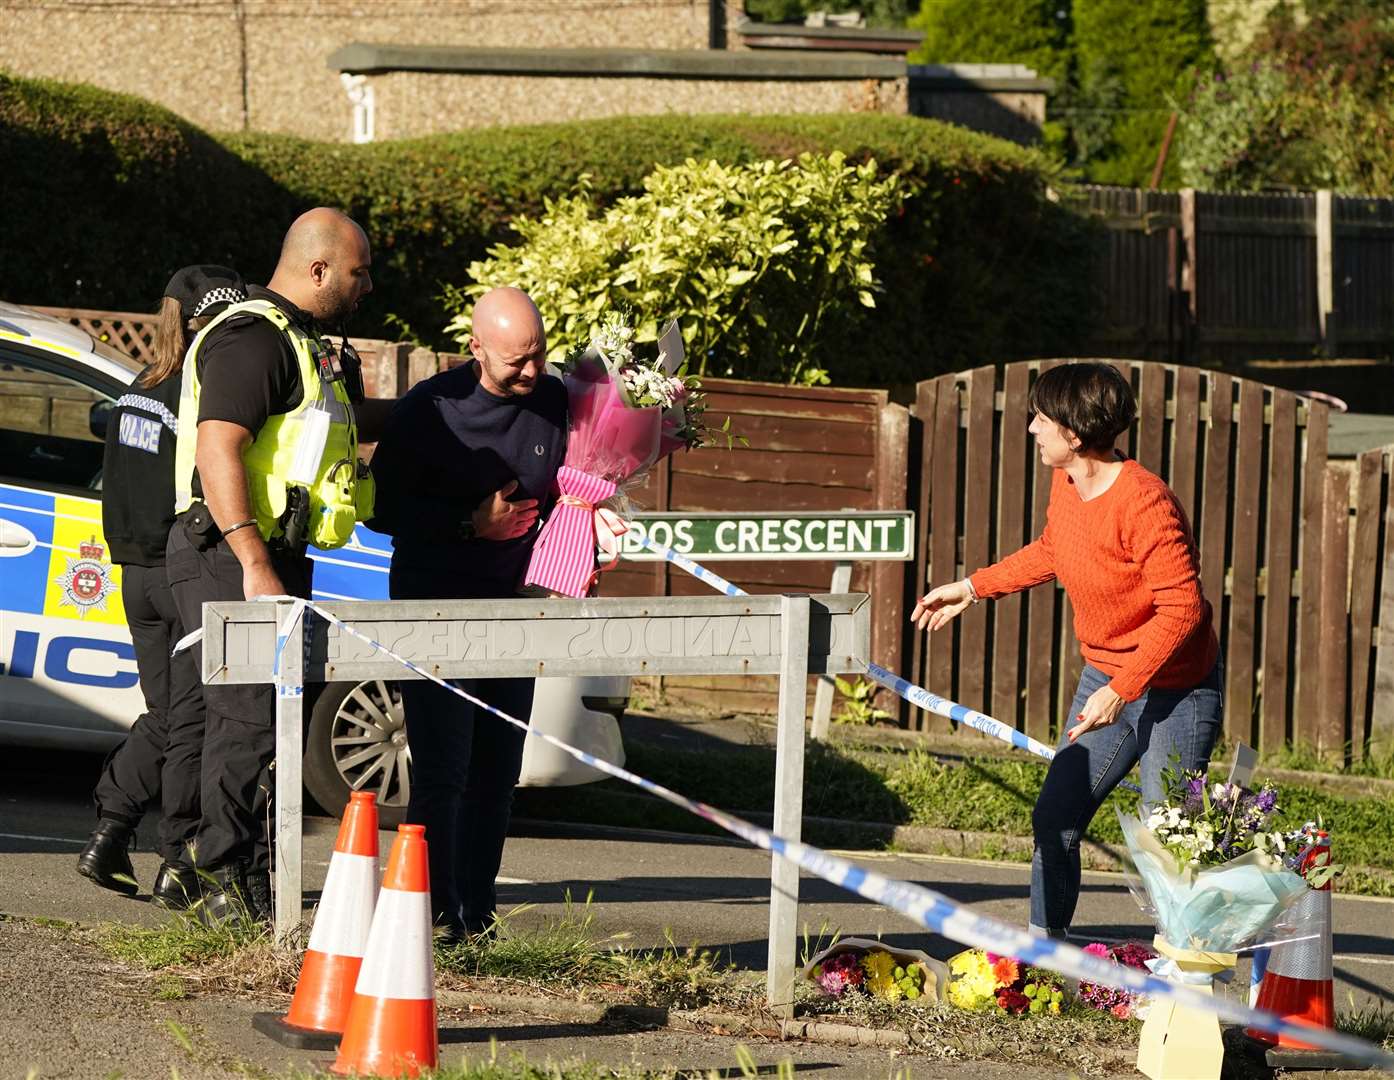 The father to some of the victims leaves flowers at the scene in Chandos Crescent (Danny Lawson/PA)